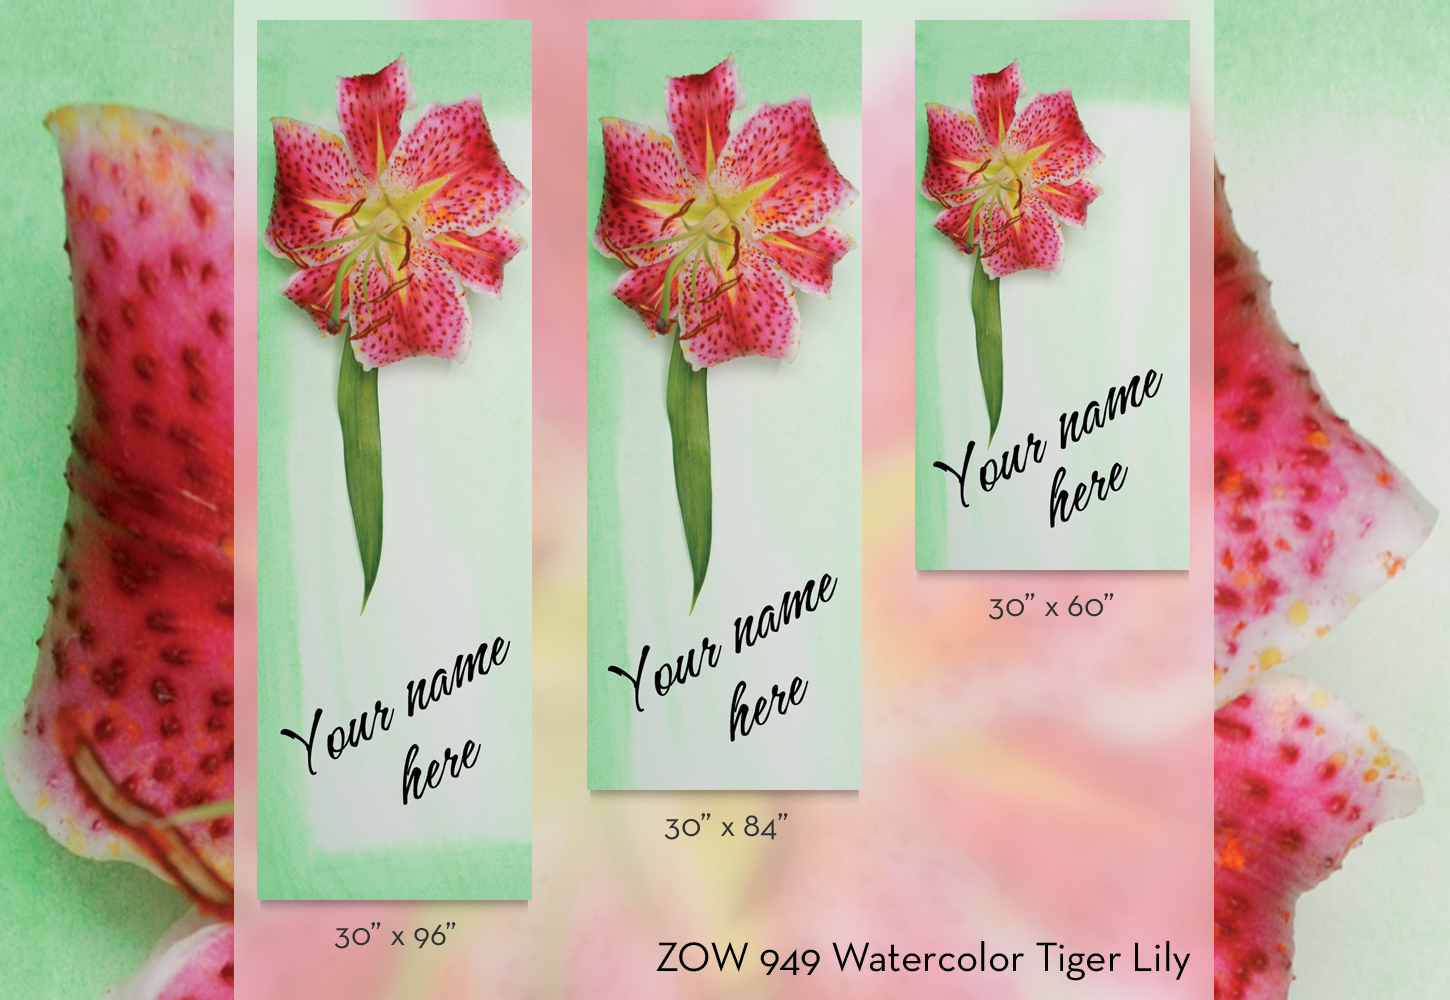 ZOW 949 Watercolor Tiger Lily